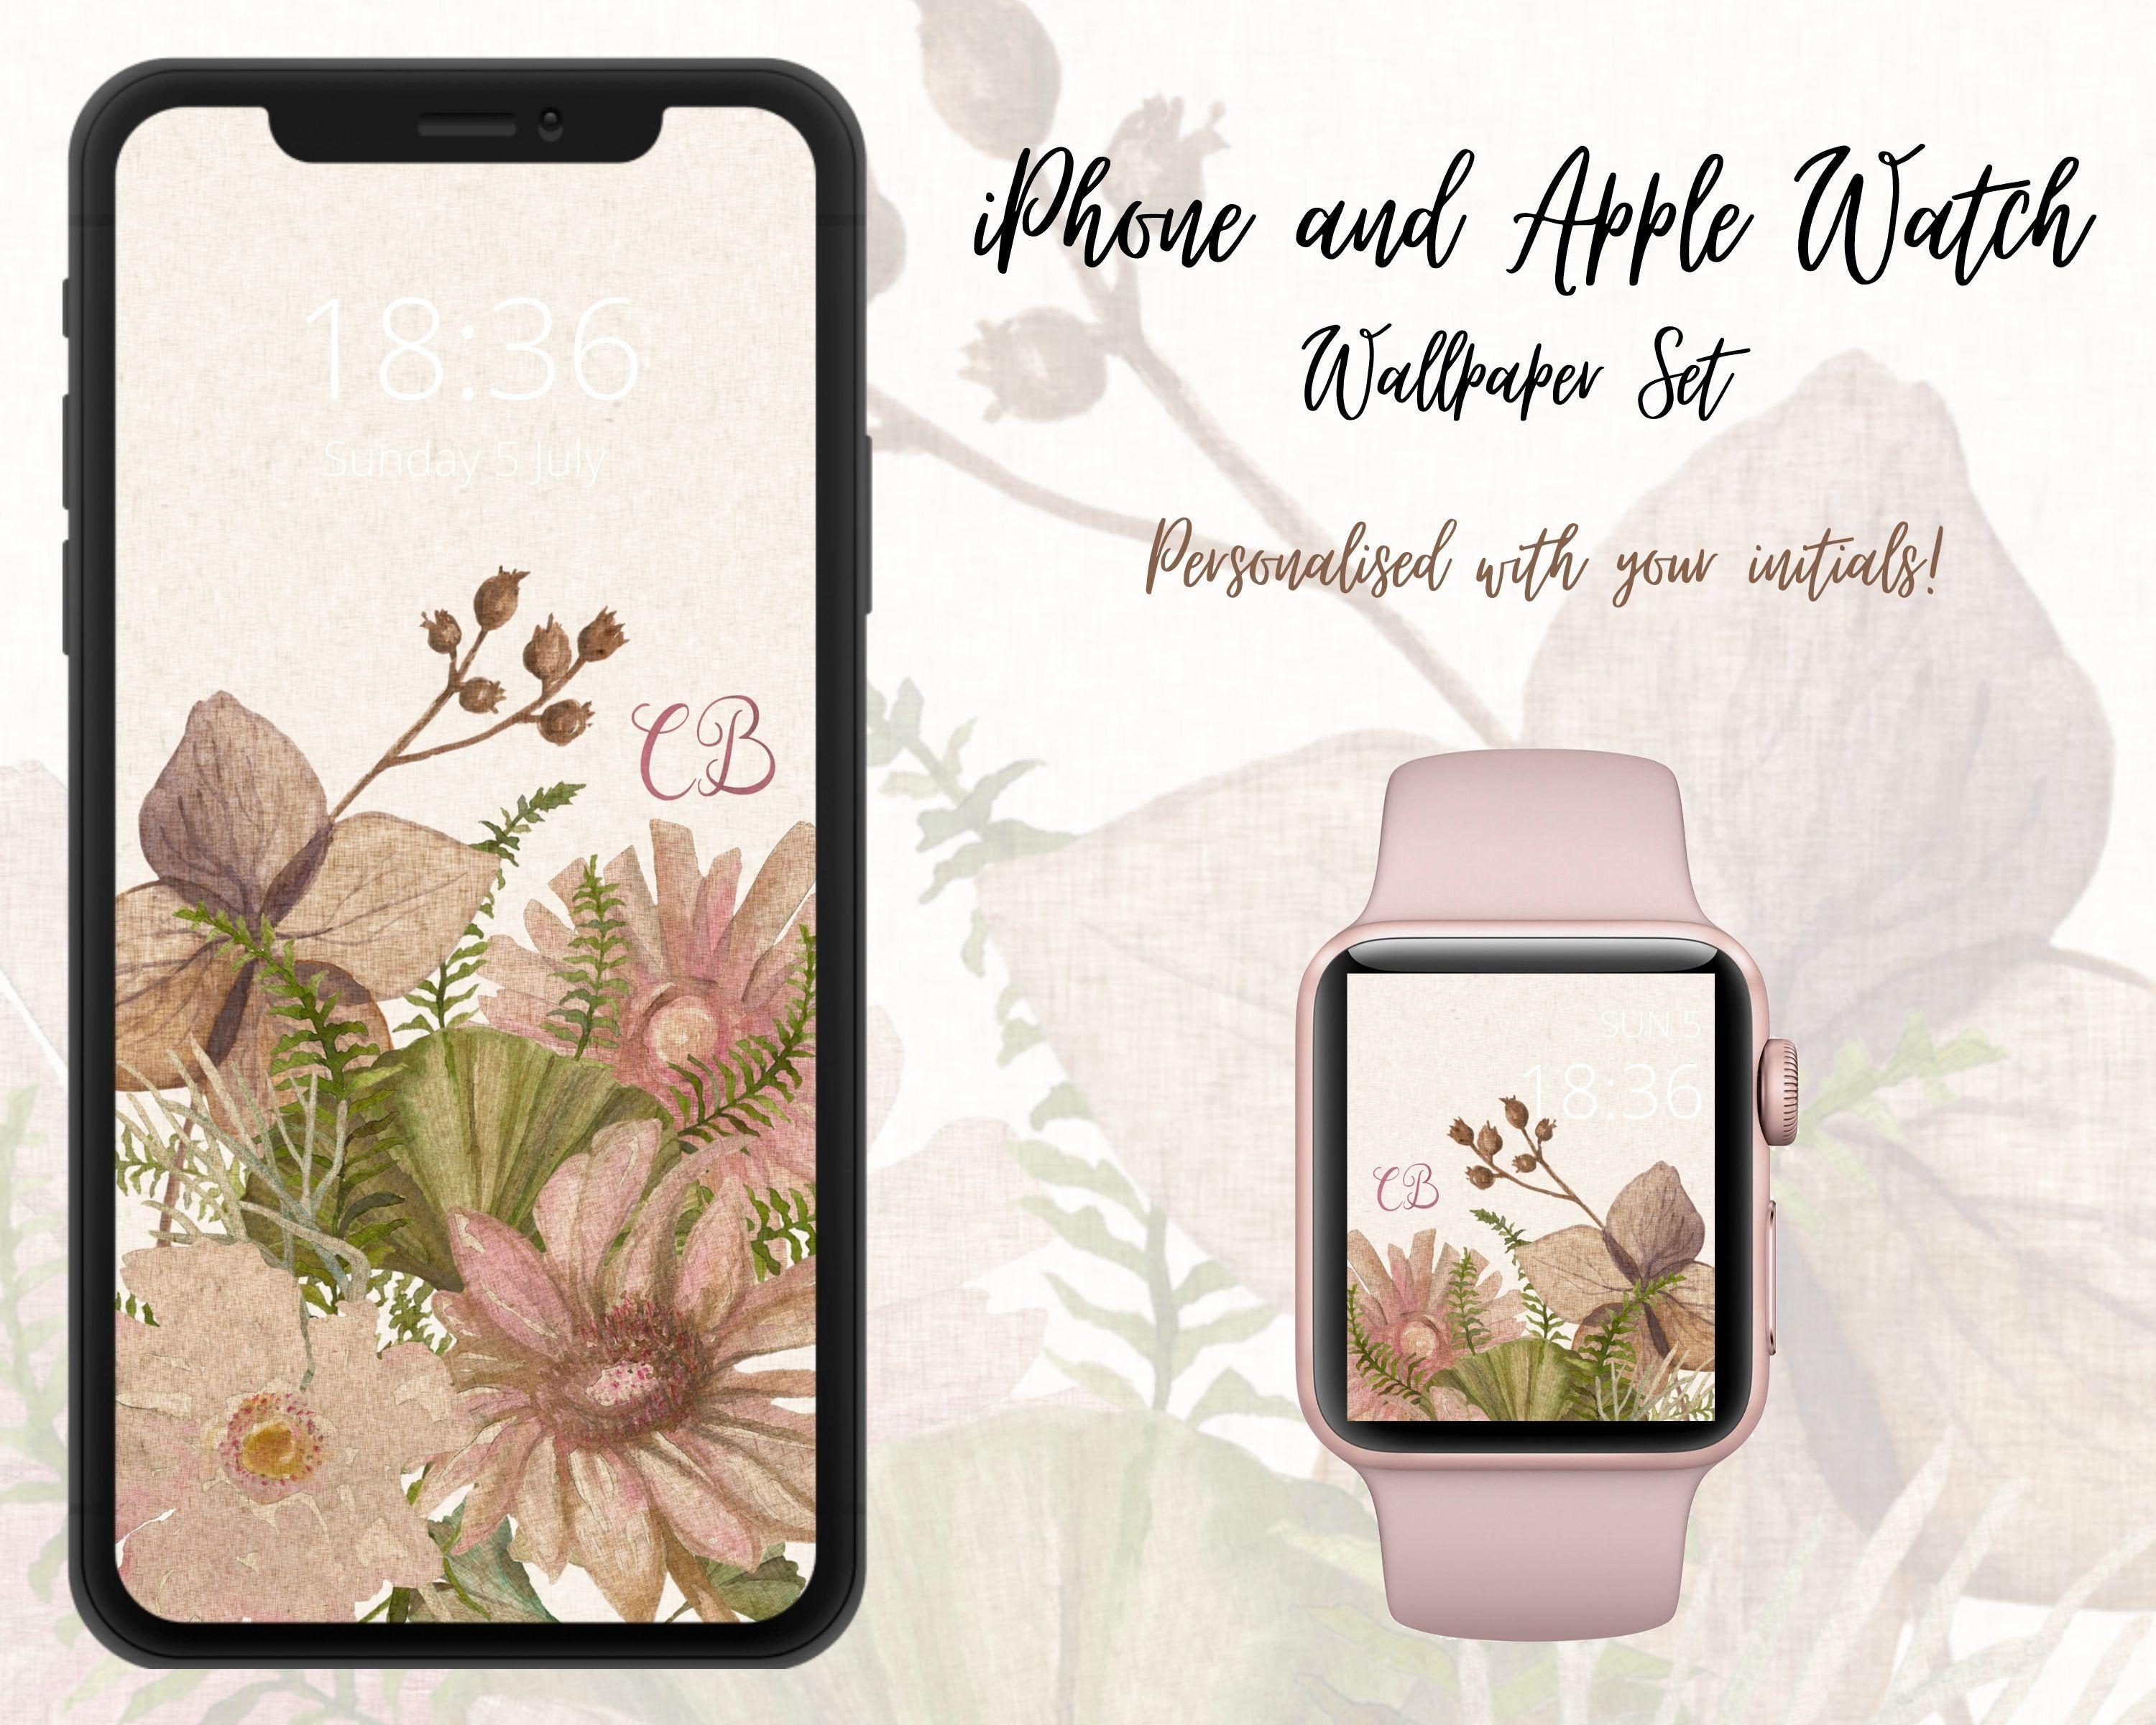 3000 x 2400 · jpeg - Personalised iPhone and Apple Watch Wallpaper Set - Floral with ...